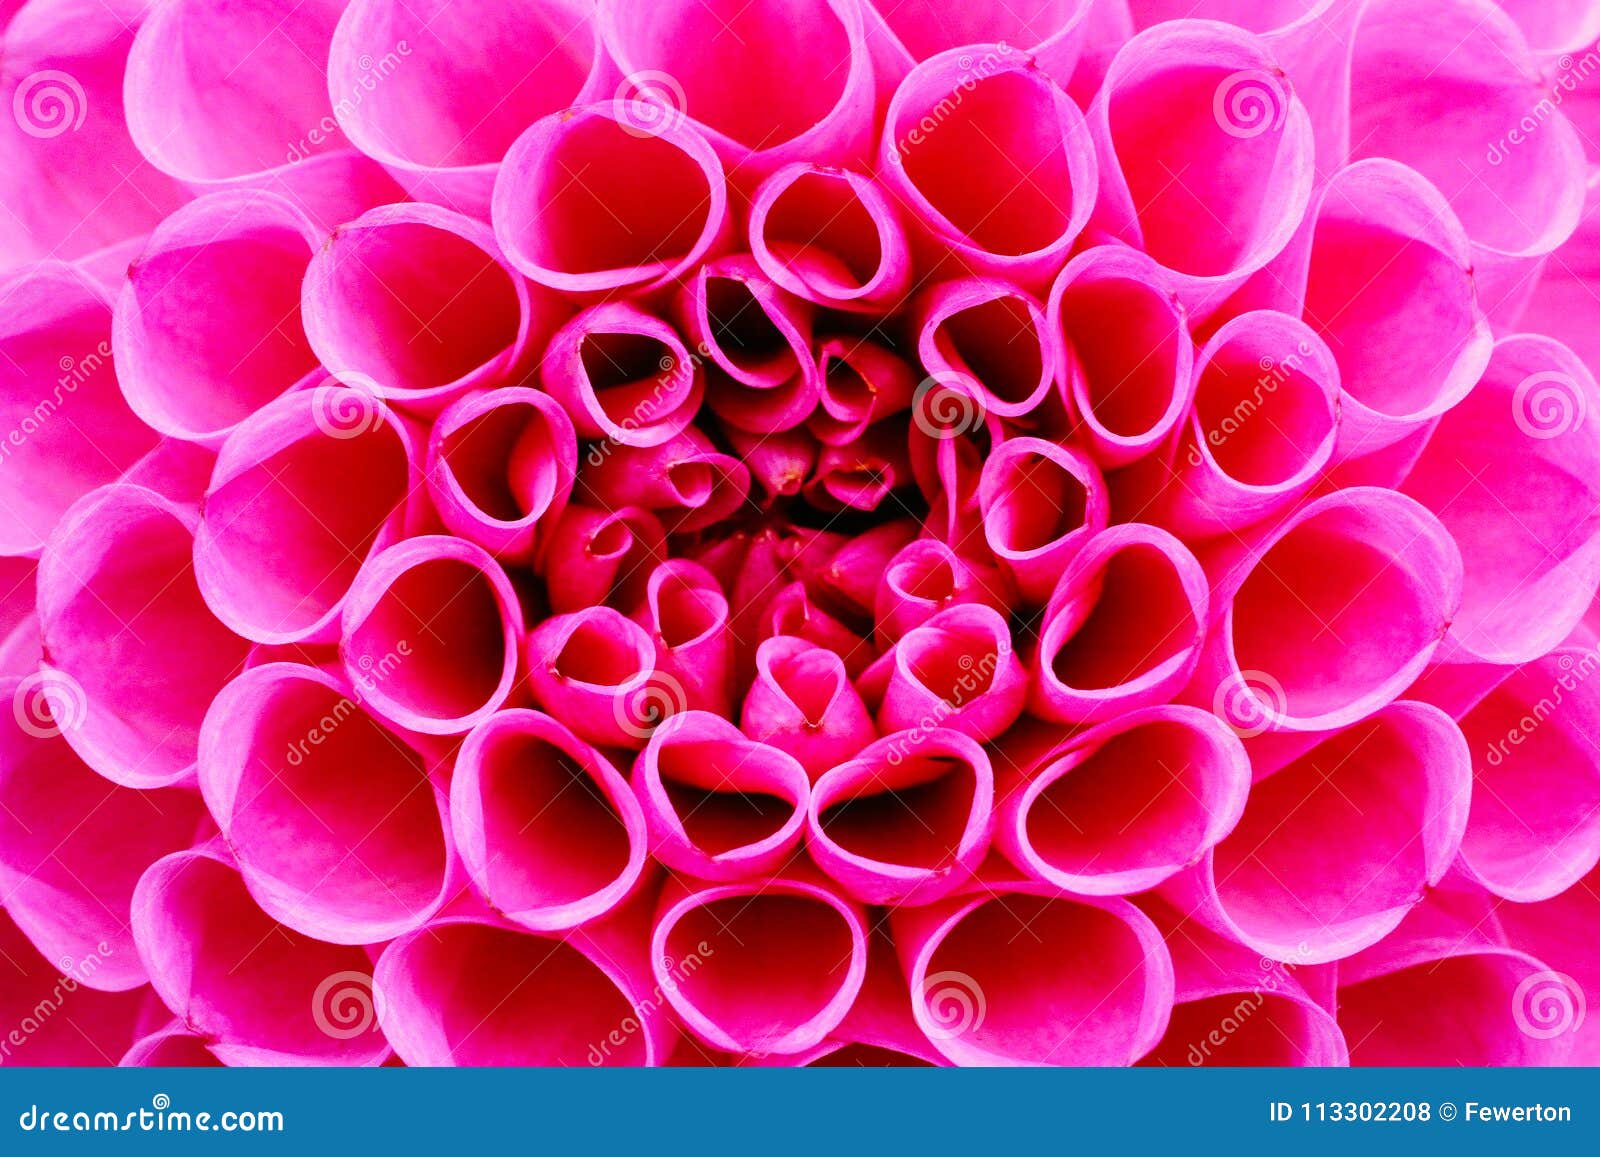 bright pink dahlia flower macro photo. picture in color emphasizing the intense pink colours and reddish shadows